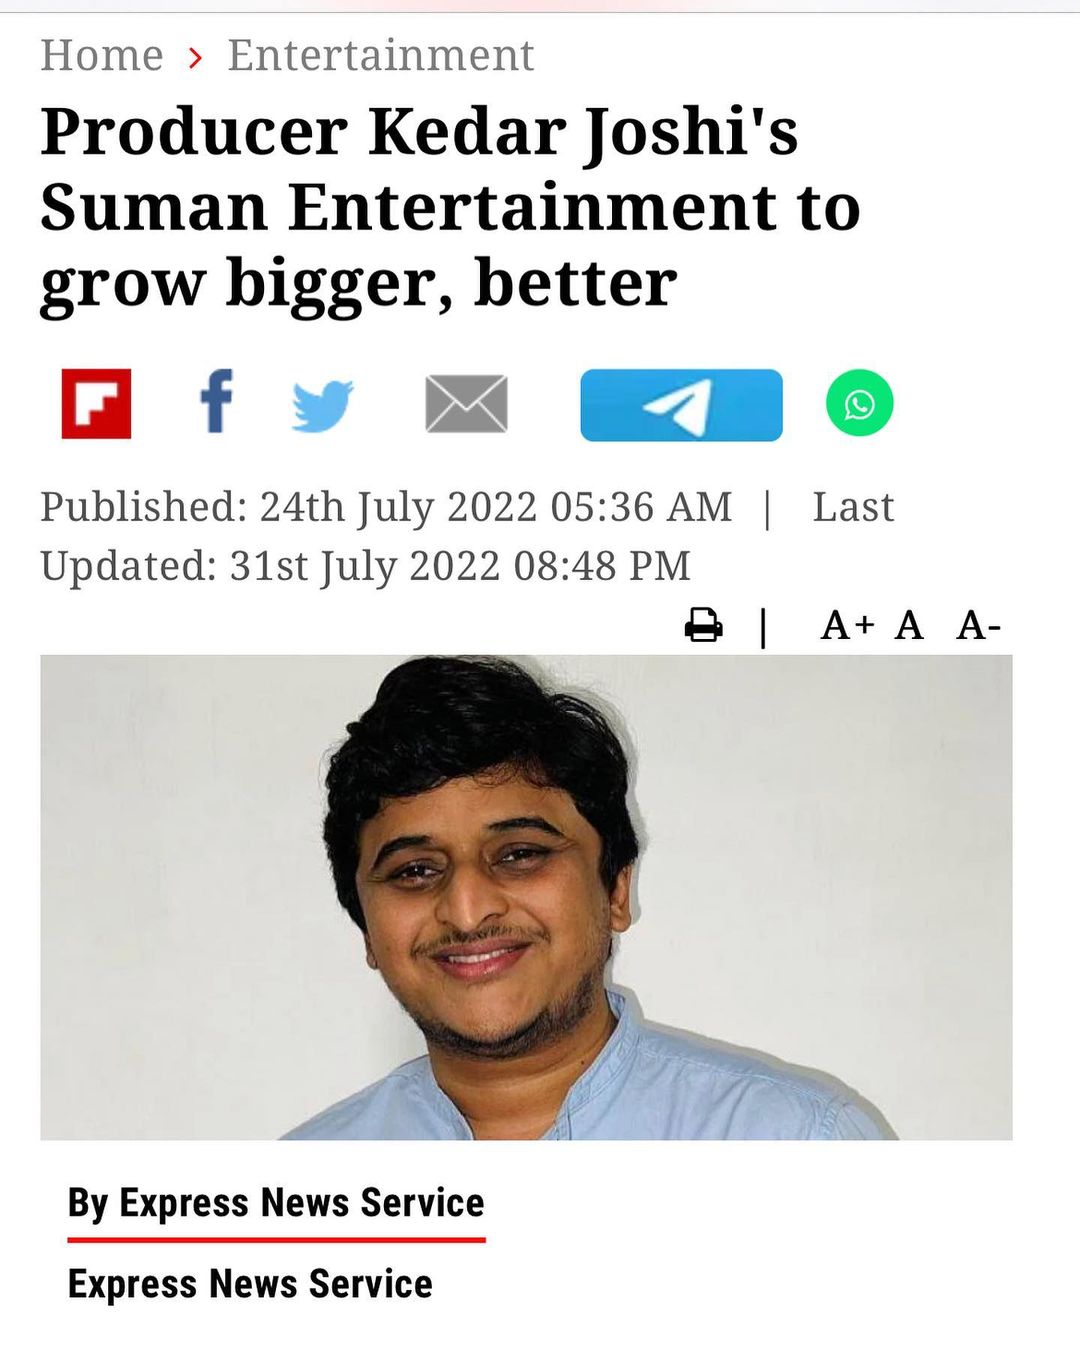 One of the top publications of @sumanentertainment.pap which has 36 likes and 9 comments